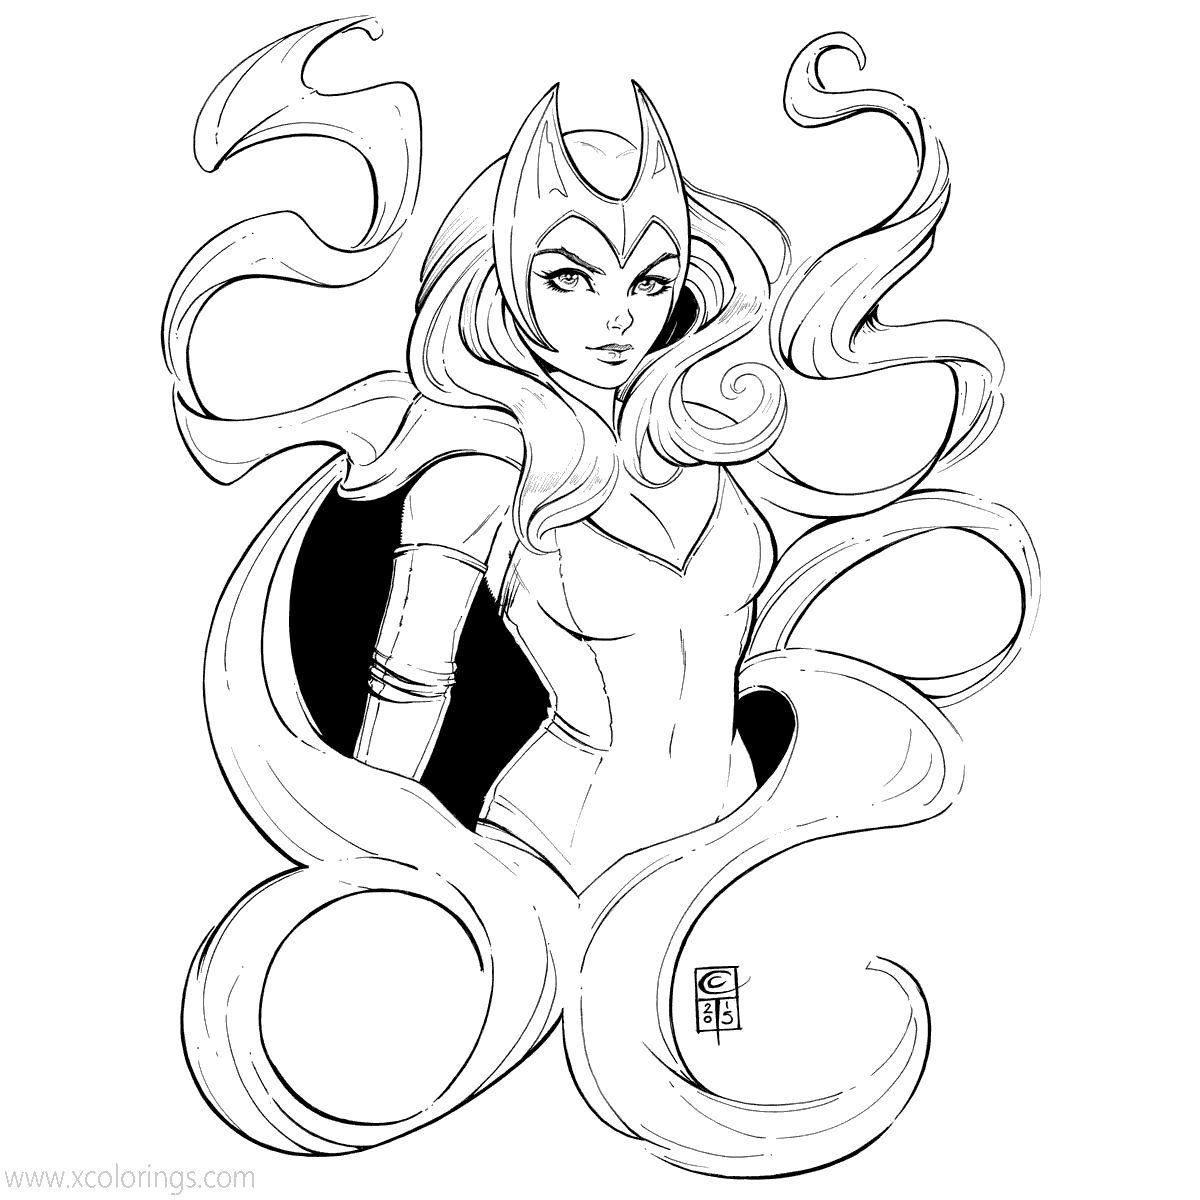 Free WandaVision Coloring Pages Scarlet Witch Lineart by ColletteTurner printable